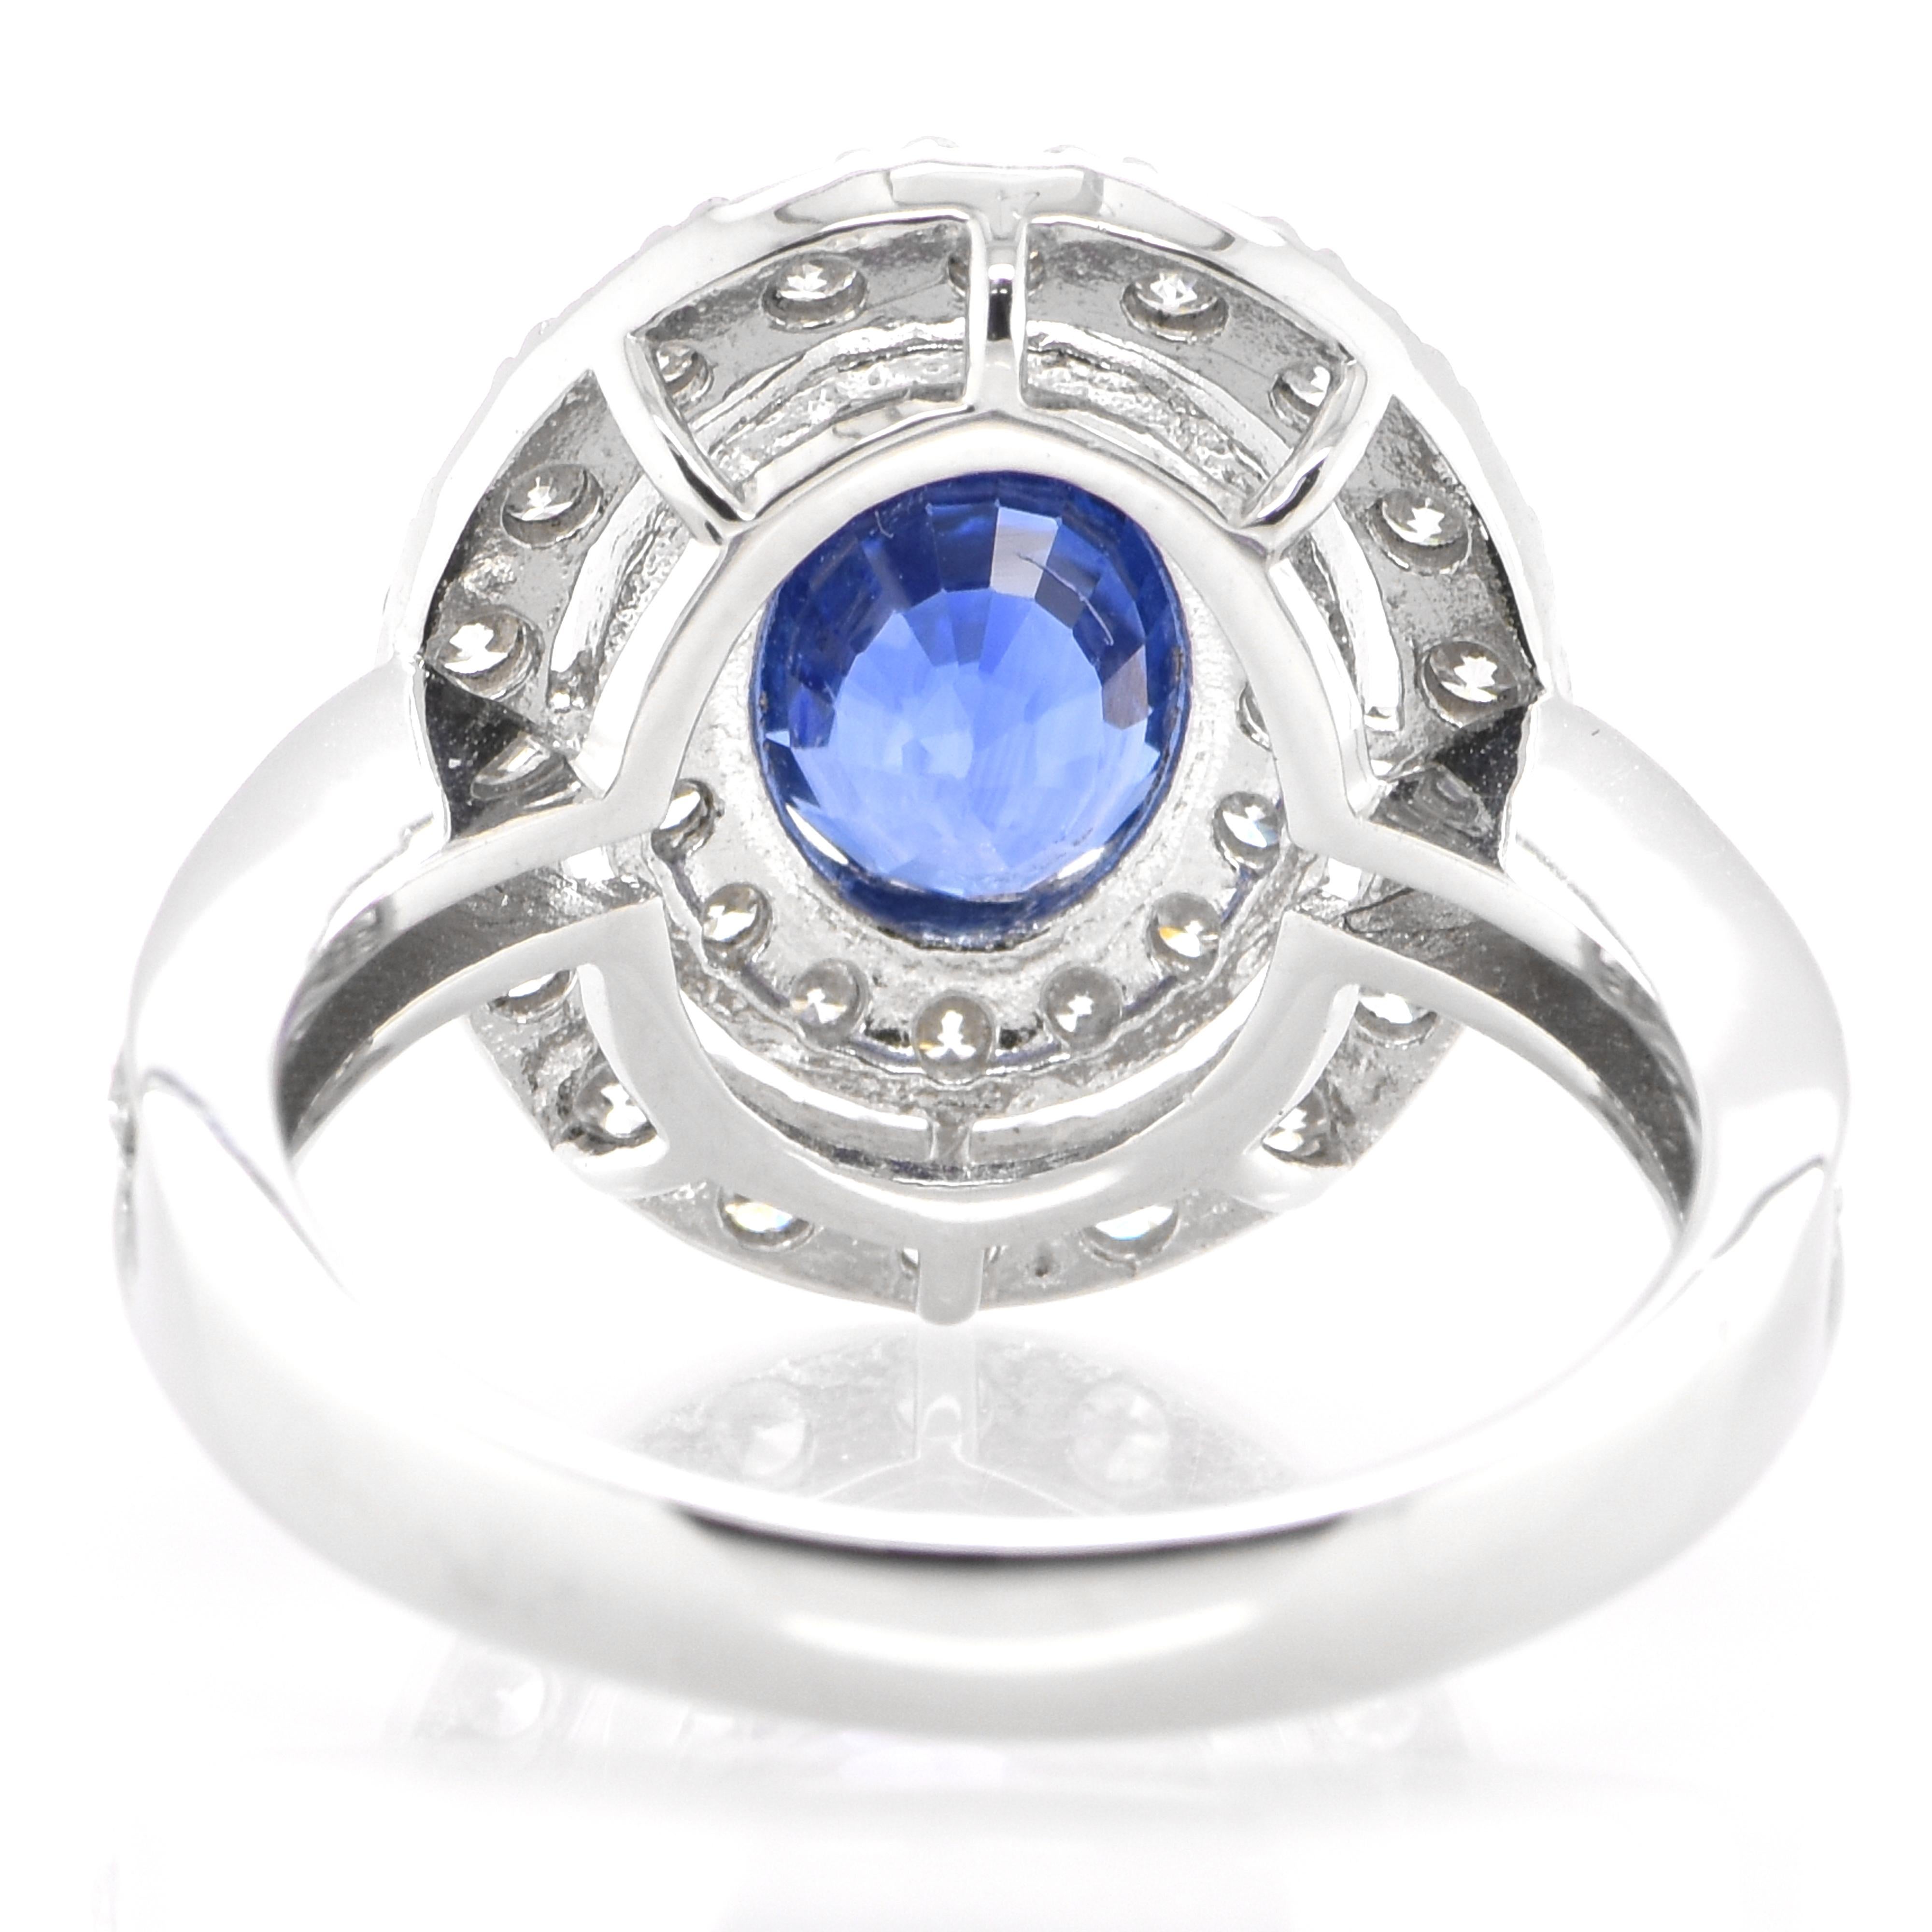 Women's 2.39 Carat Natural Blue Sapphire and Diamond Double Halo Ring Made in Platinum